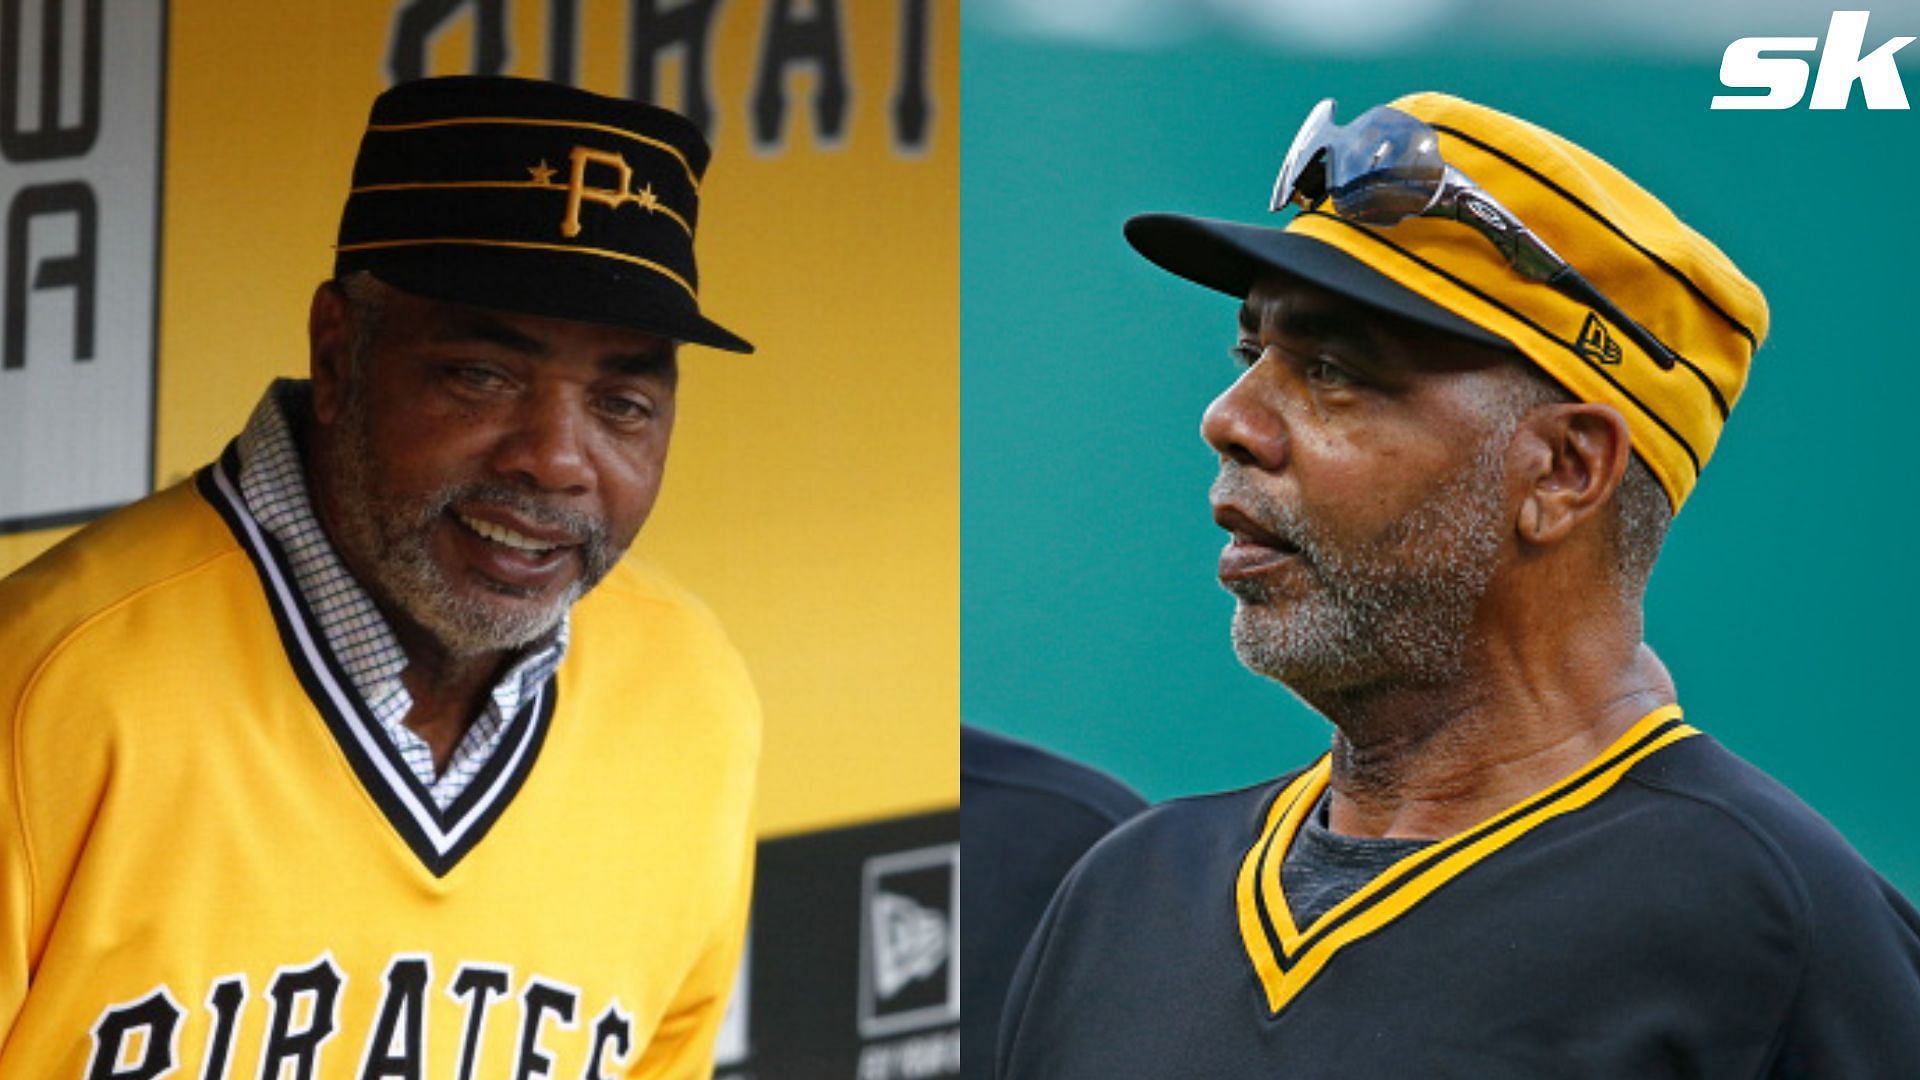 Pittsburgh Pirates' Dave Parker Amazing Throws In 1979 All Star